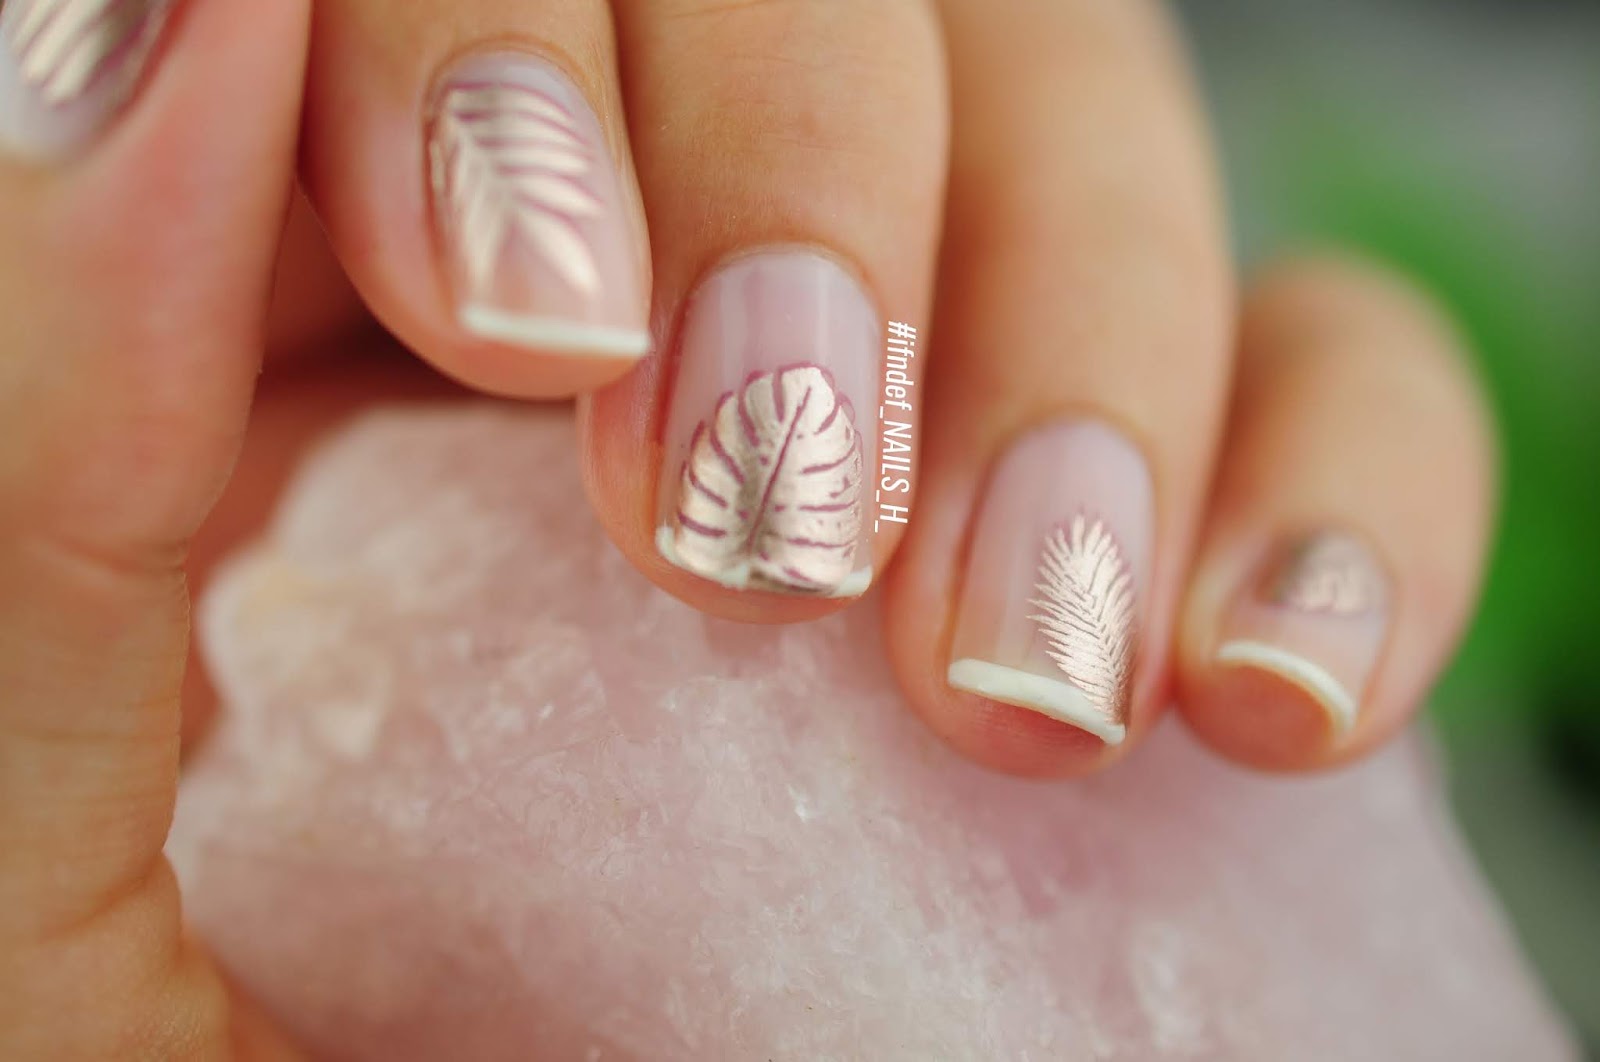 1. Classic French Manicure - wide 3